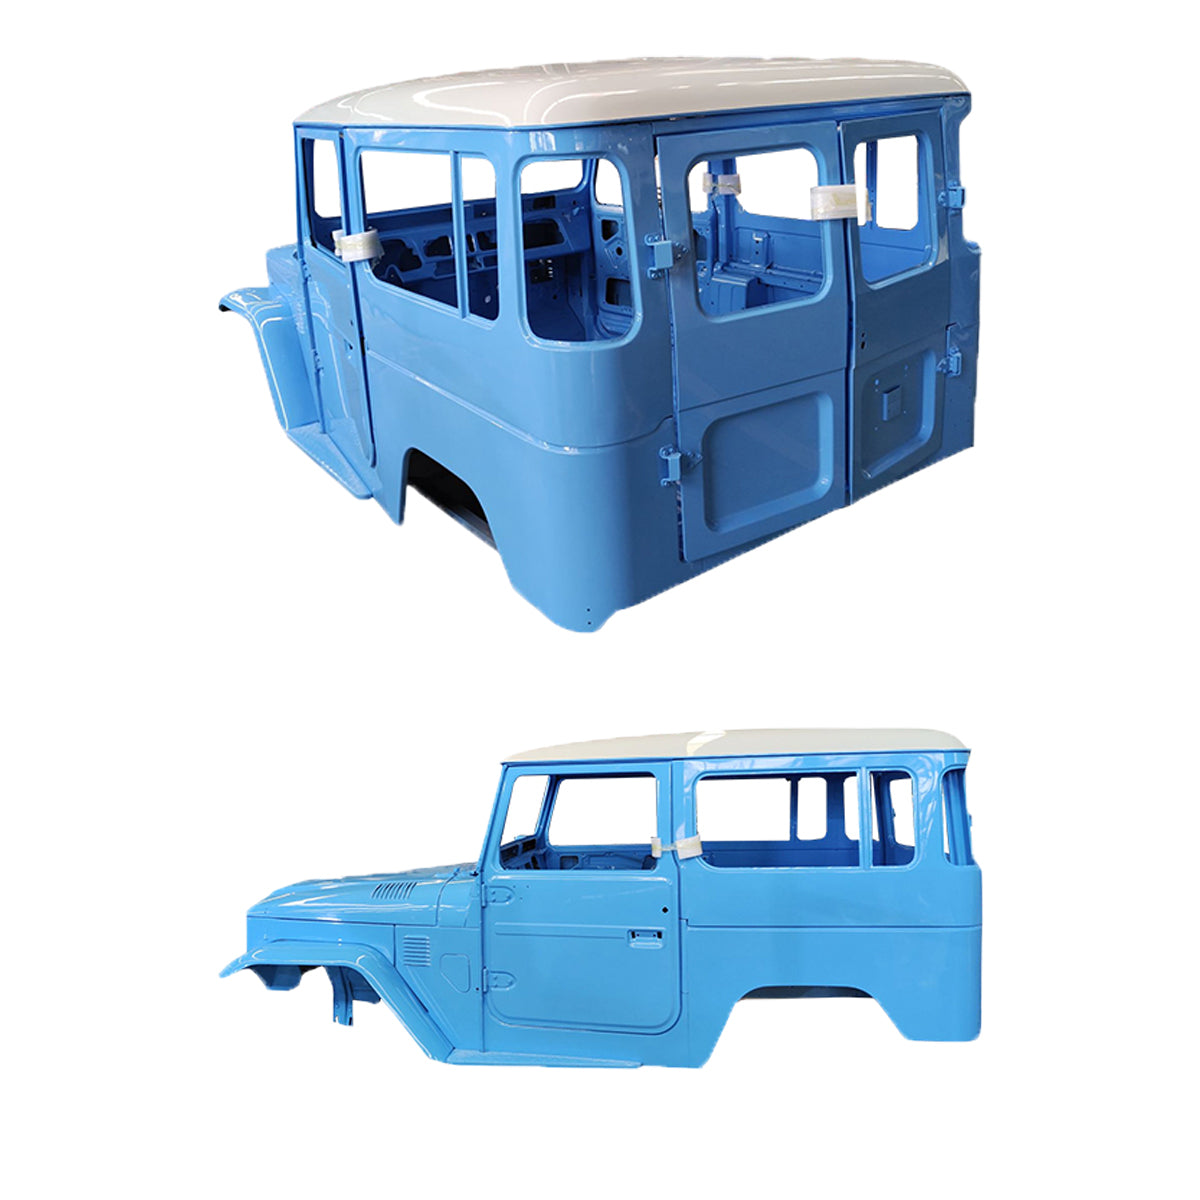 75-78 Complete Cab with Doors, with Body work and custom paint., for FJ40 Toyota Land Cruiser